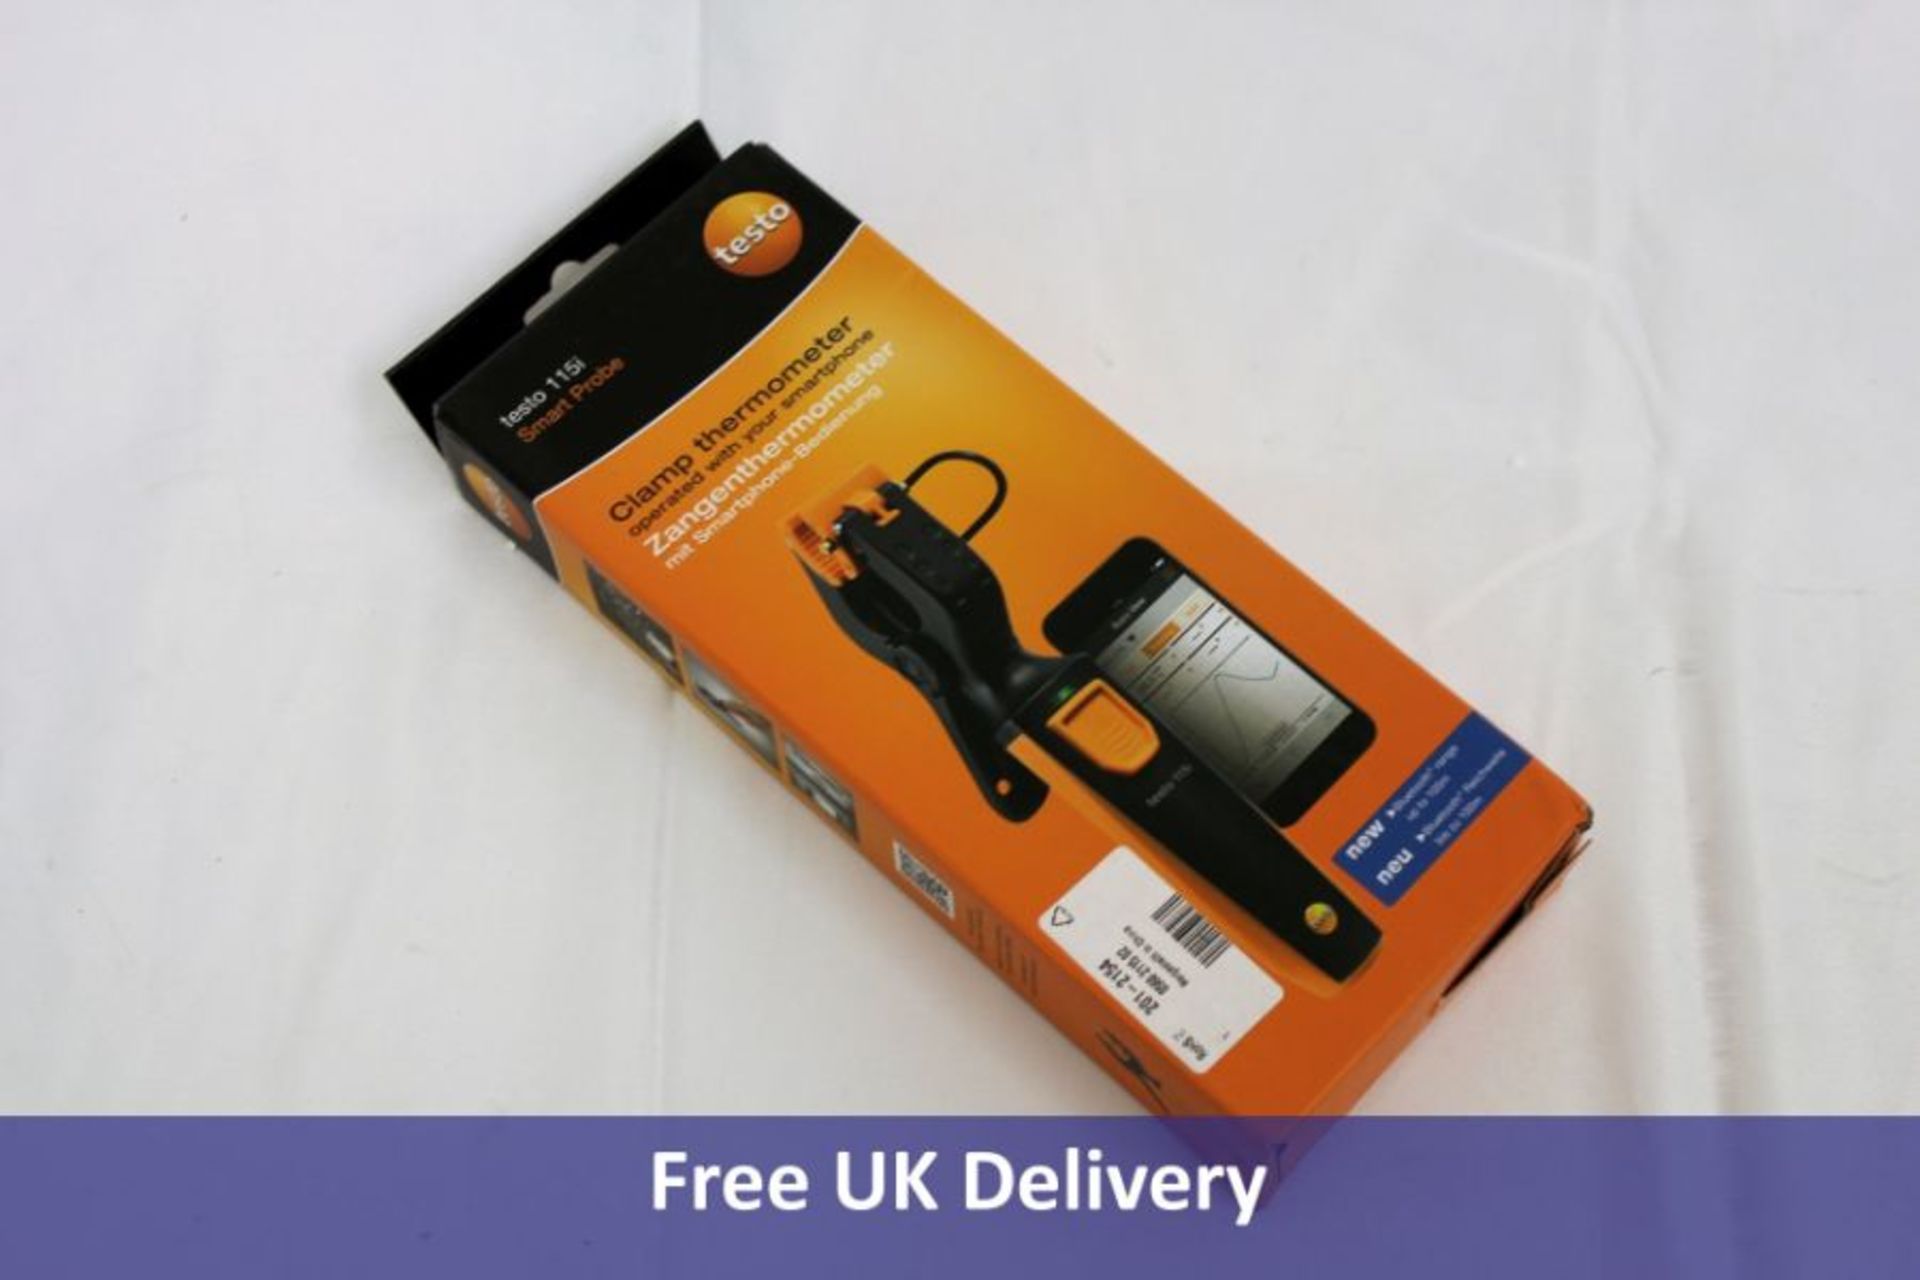 Eight Testo 115i Smart Probe Clamp Thermometers, operated from smartphone